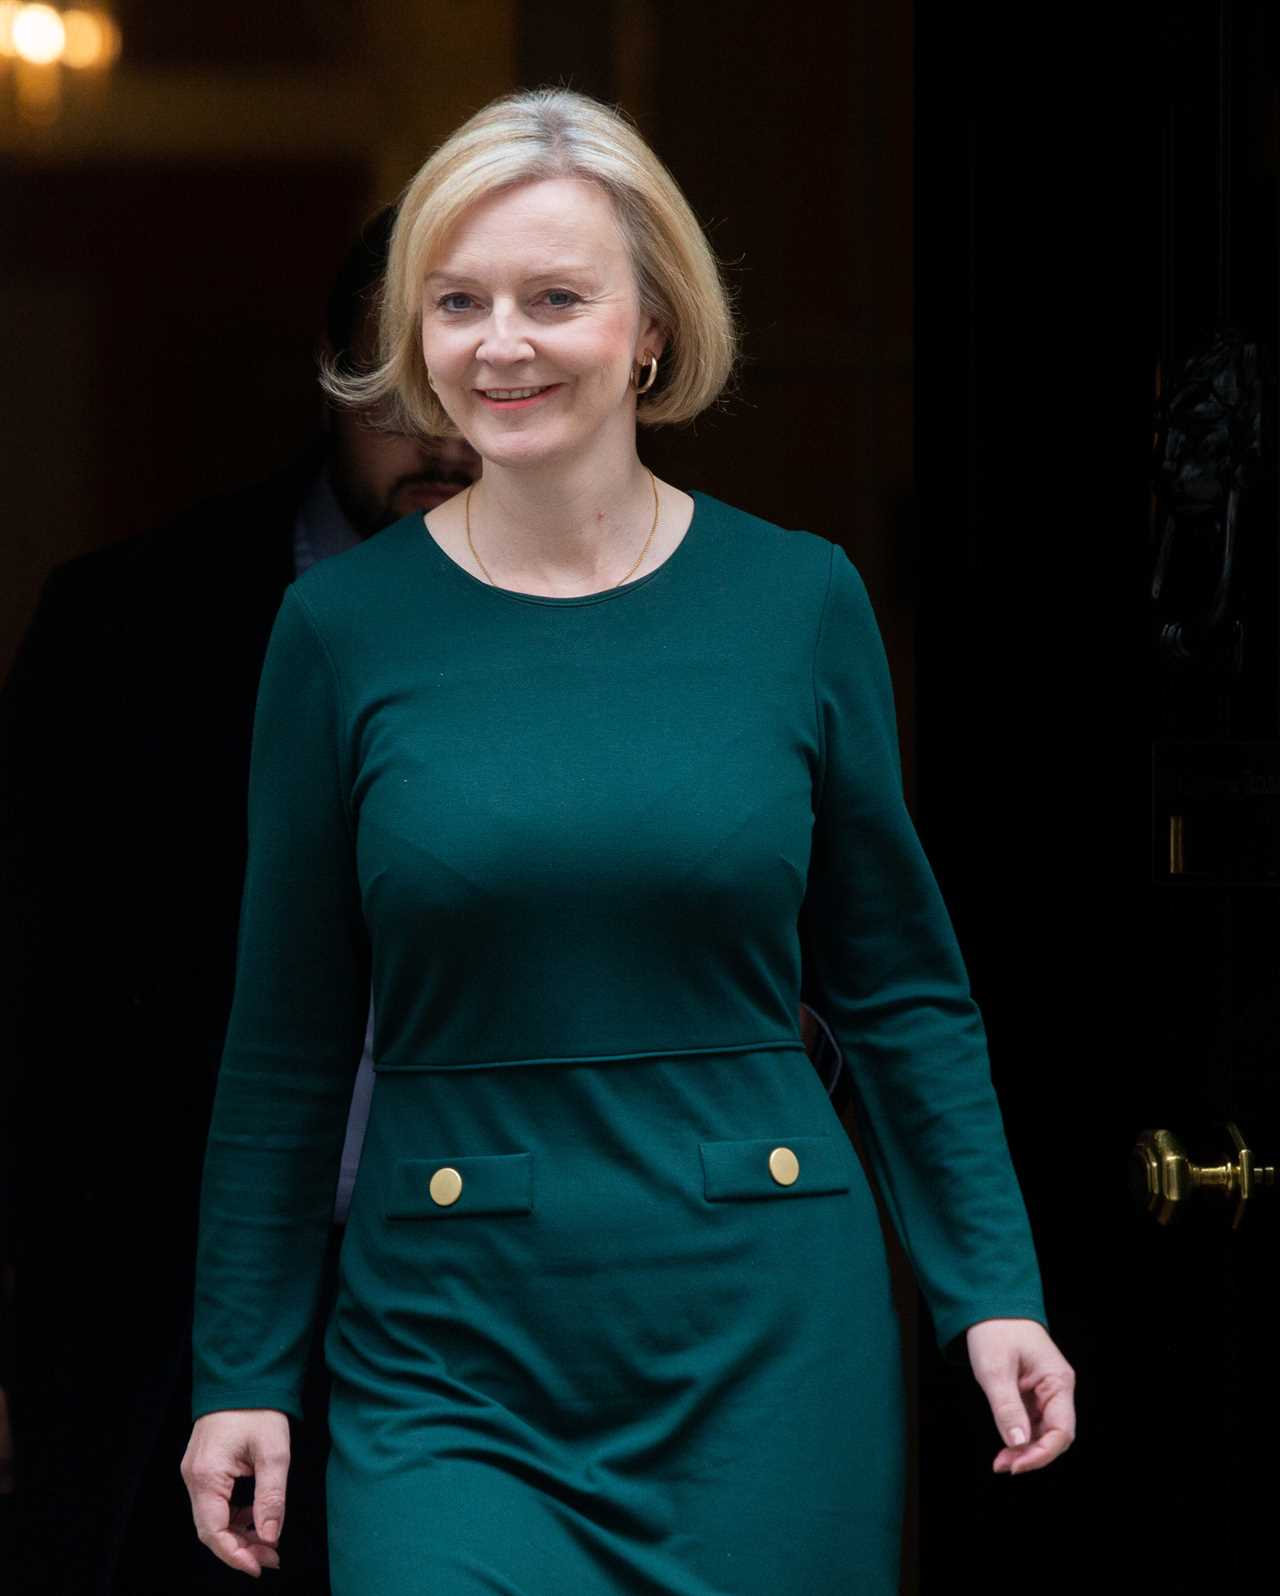 Liz Truss vows she won’t slash public spending – despite warnings that £60bn in cuts are needed to balance books